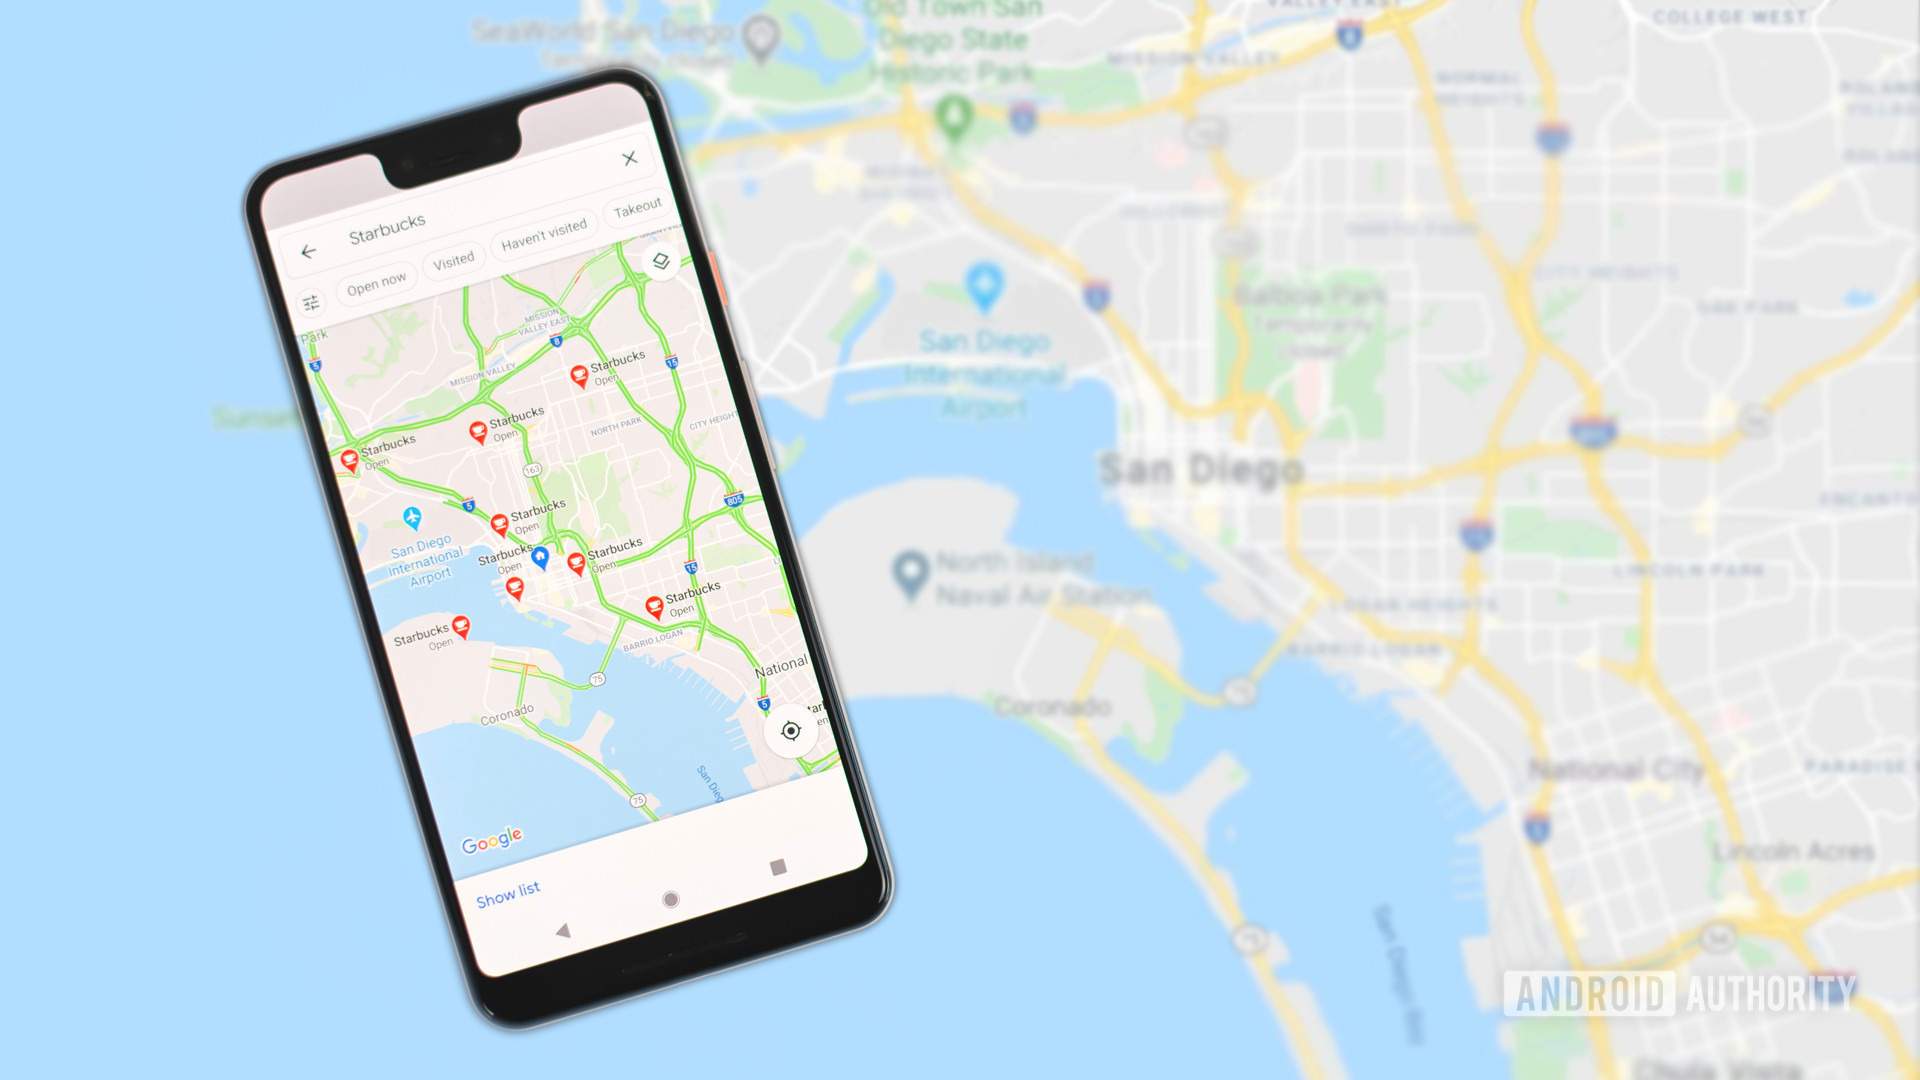 Google Maps - How to free up storage space on Android